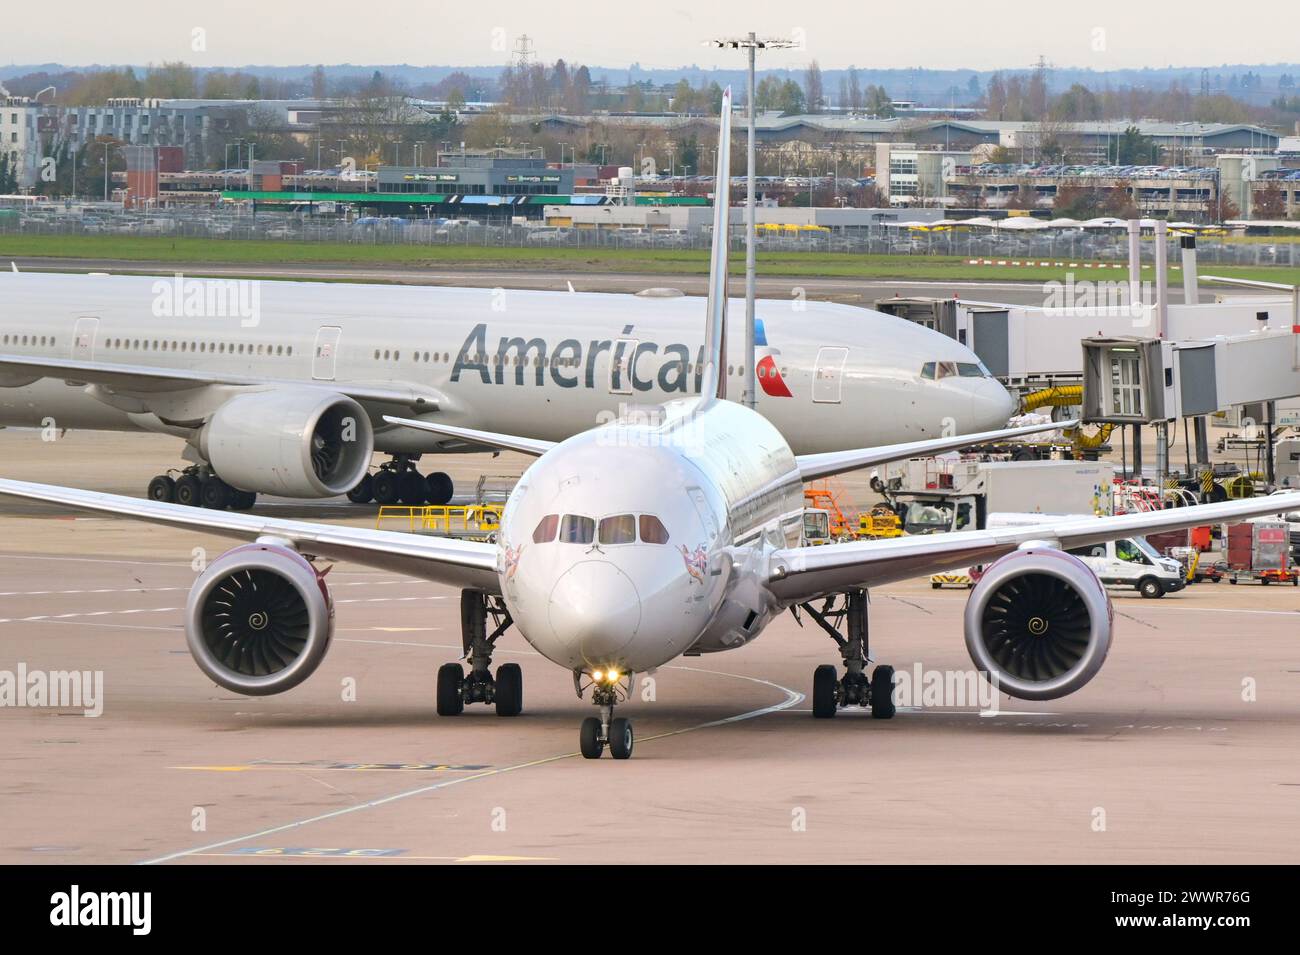 London, England, UK - 30 November 2023: Virgin Atlantic Boeing 787 jet taxiing in front of an American Airlines jet at London Heathrow airport. Stock Photo